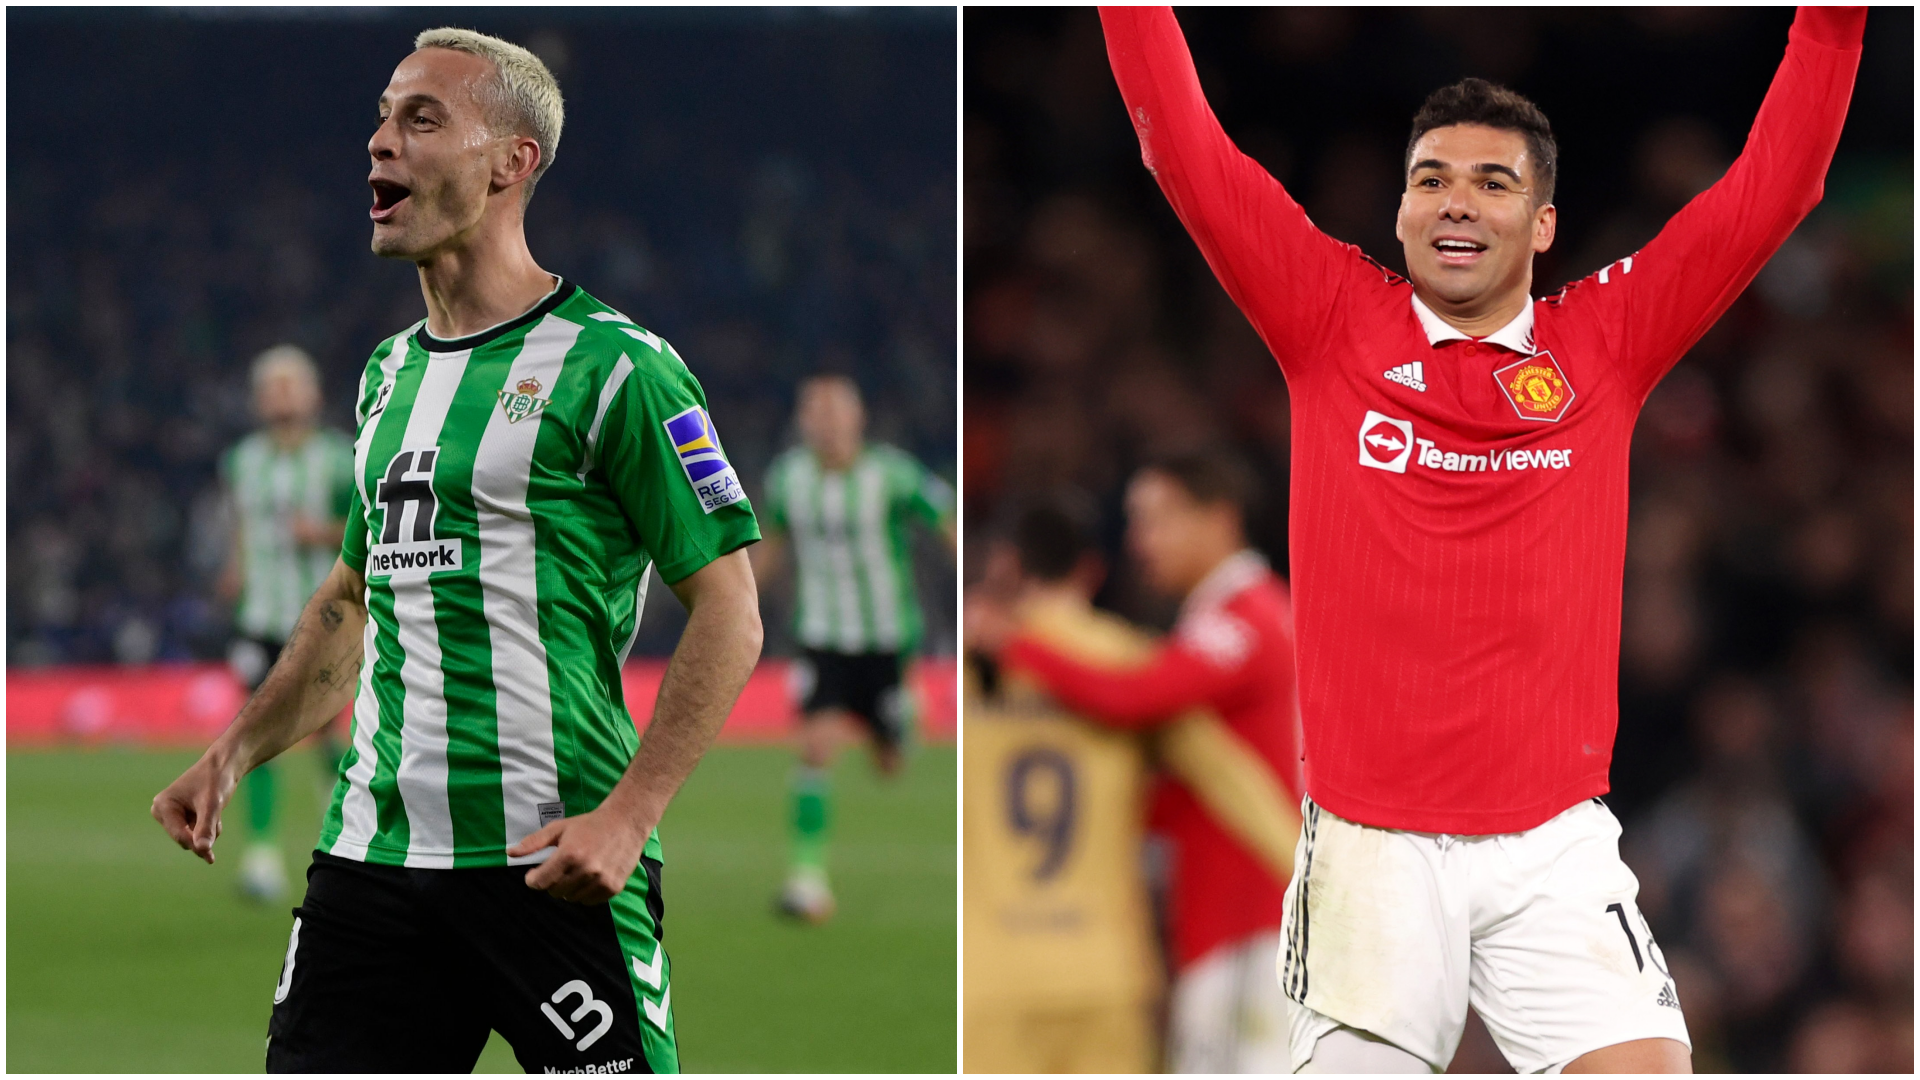 Betis contra manchester united